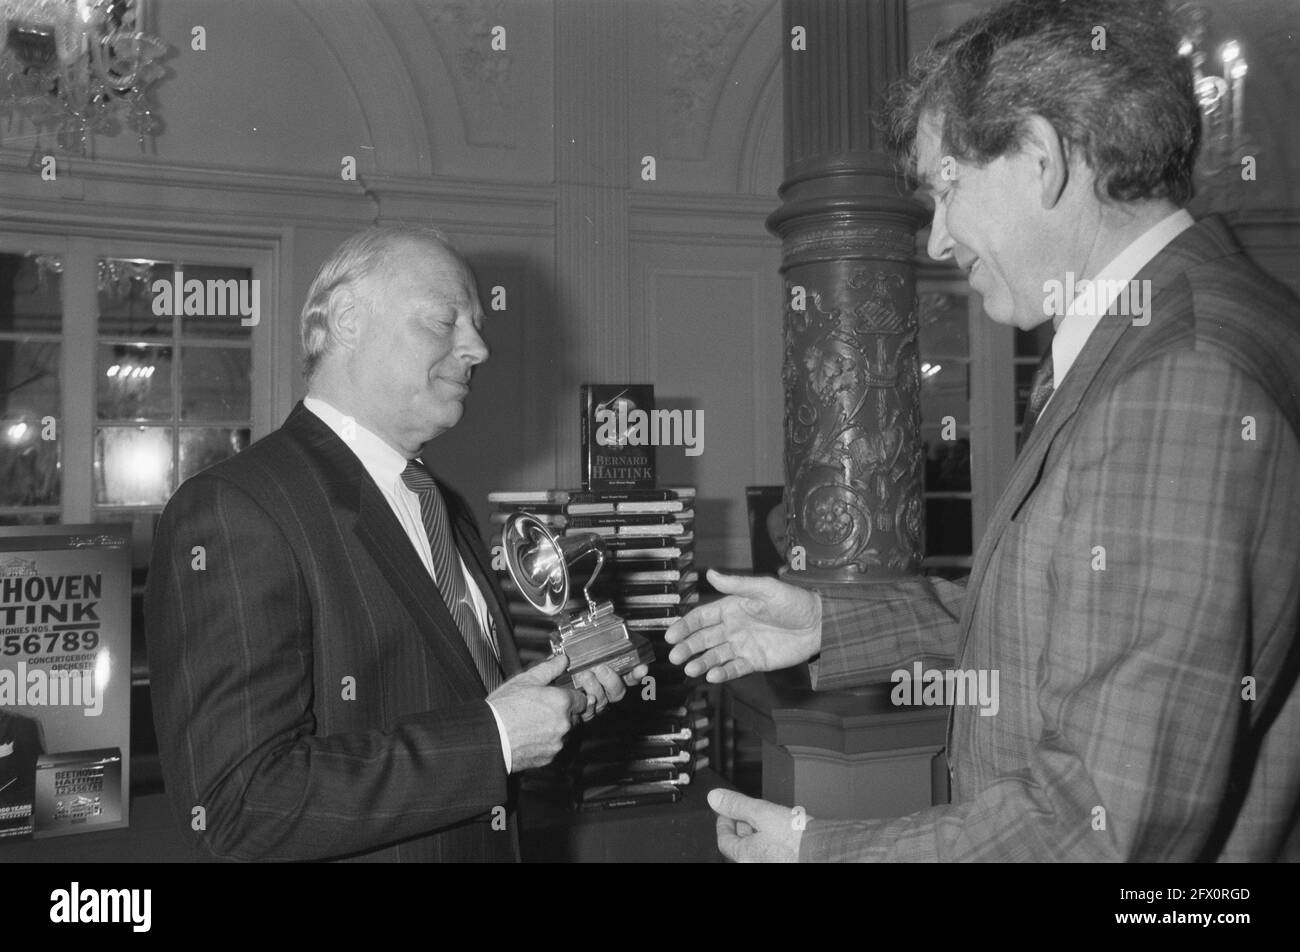 Silver Phonograph for Bernard Haitink, April 12, 1988, conductors, awards, The Netherlands, 20th century press agency photo, news to remember, documentary, historic photography 1945-1990, visual stories, human history of the Twentieth Century, capturing moments in time Stock Photo